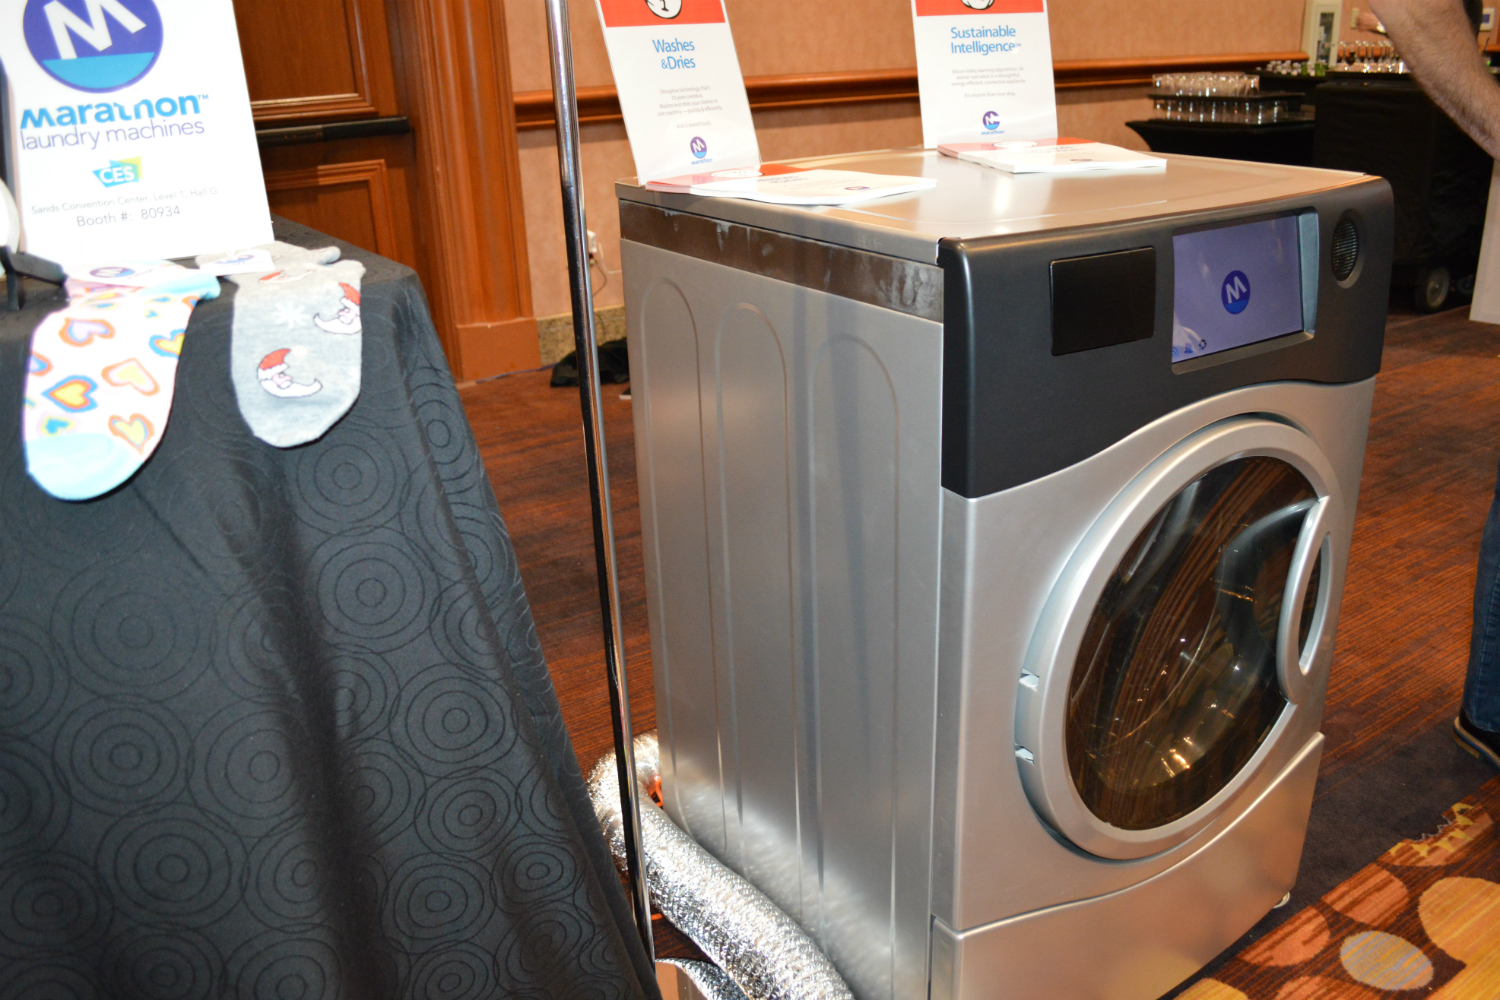 the marathon laundry machine is a washer and dryer in one